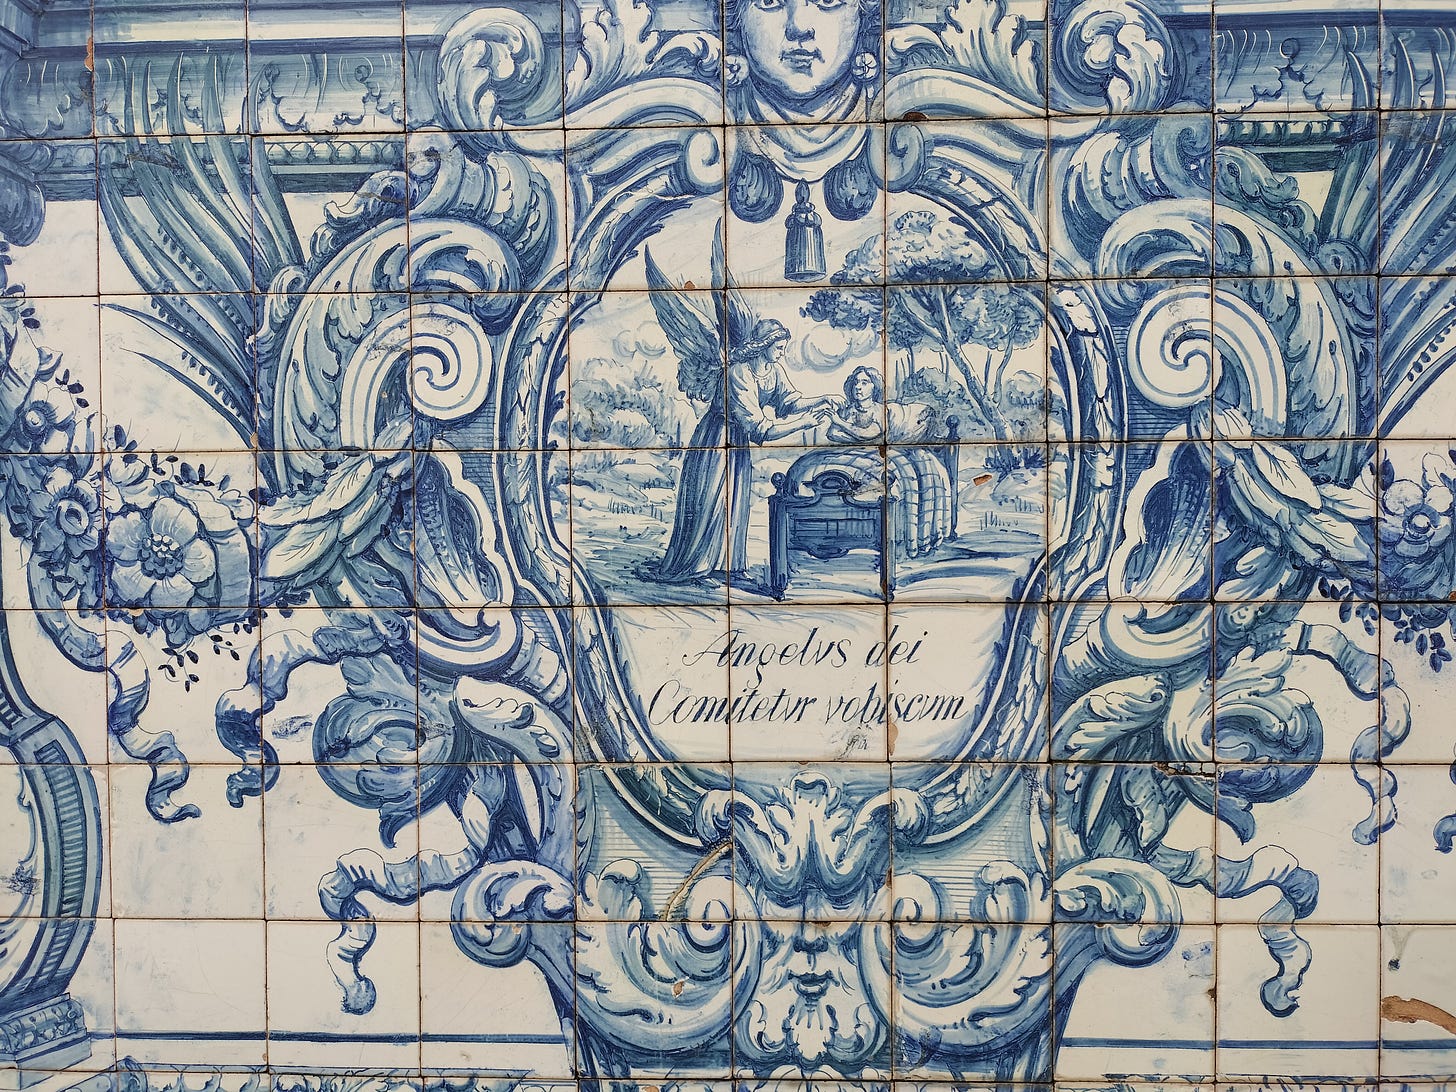 blue and white tiles with an image of an angel comforting a person in a bed. The bed is outdoors